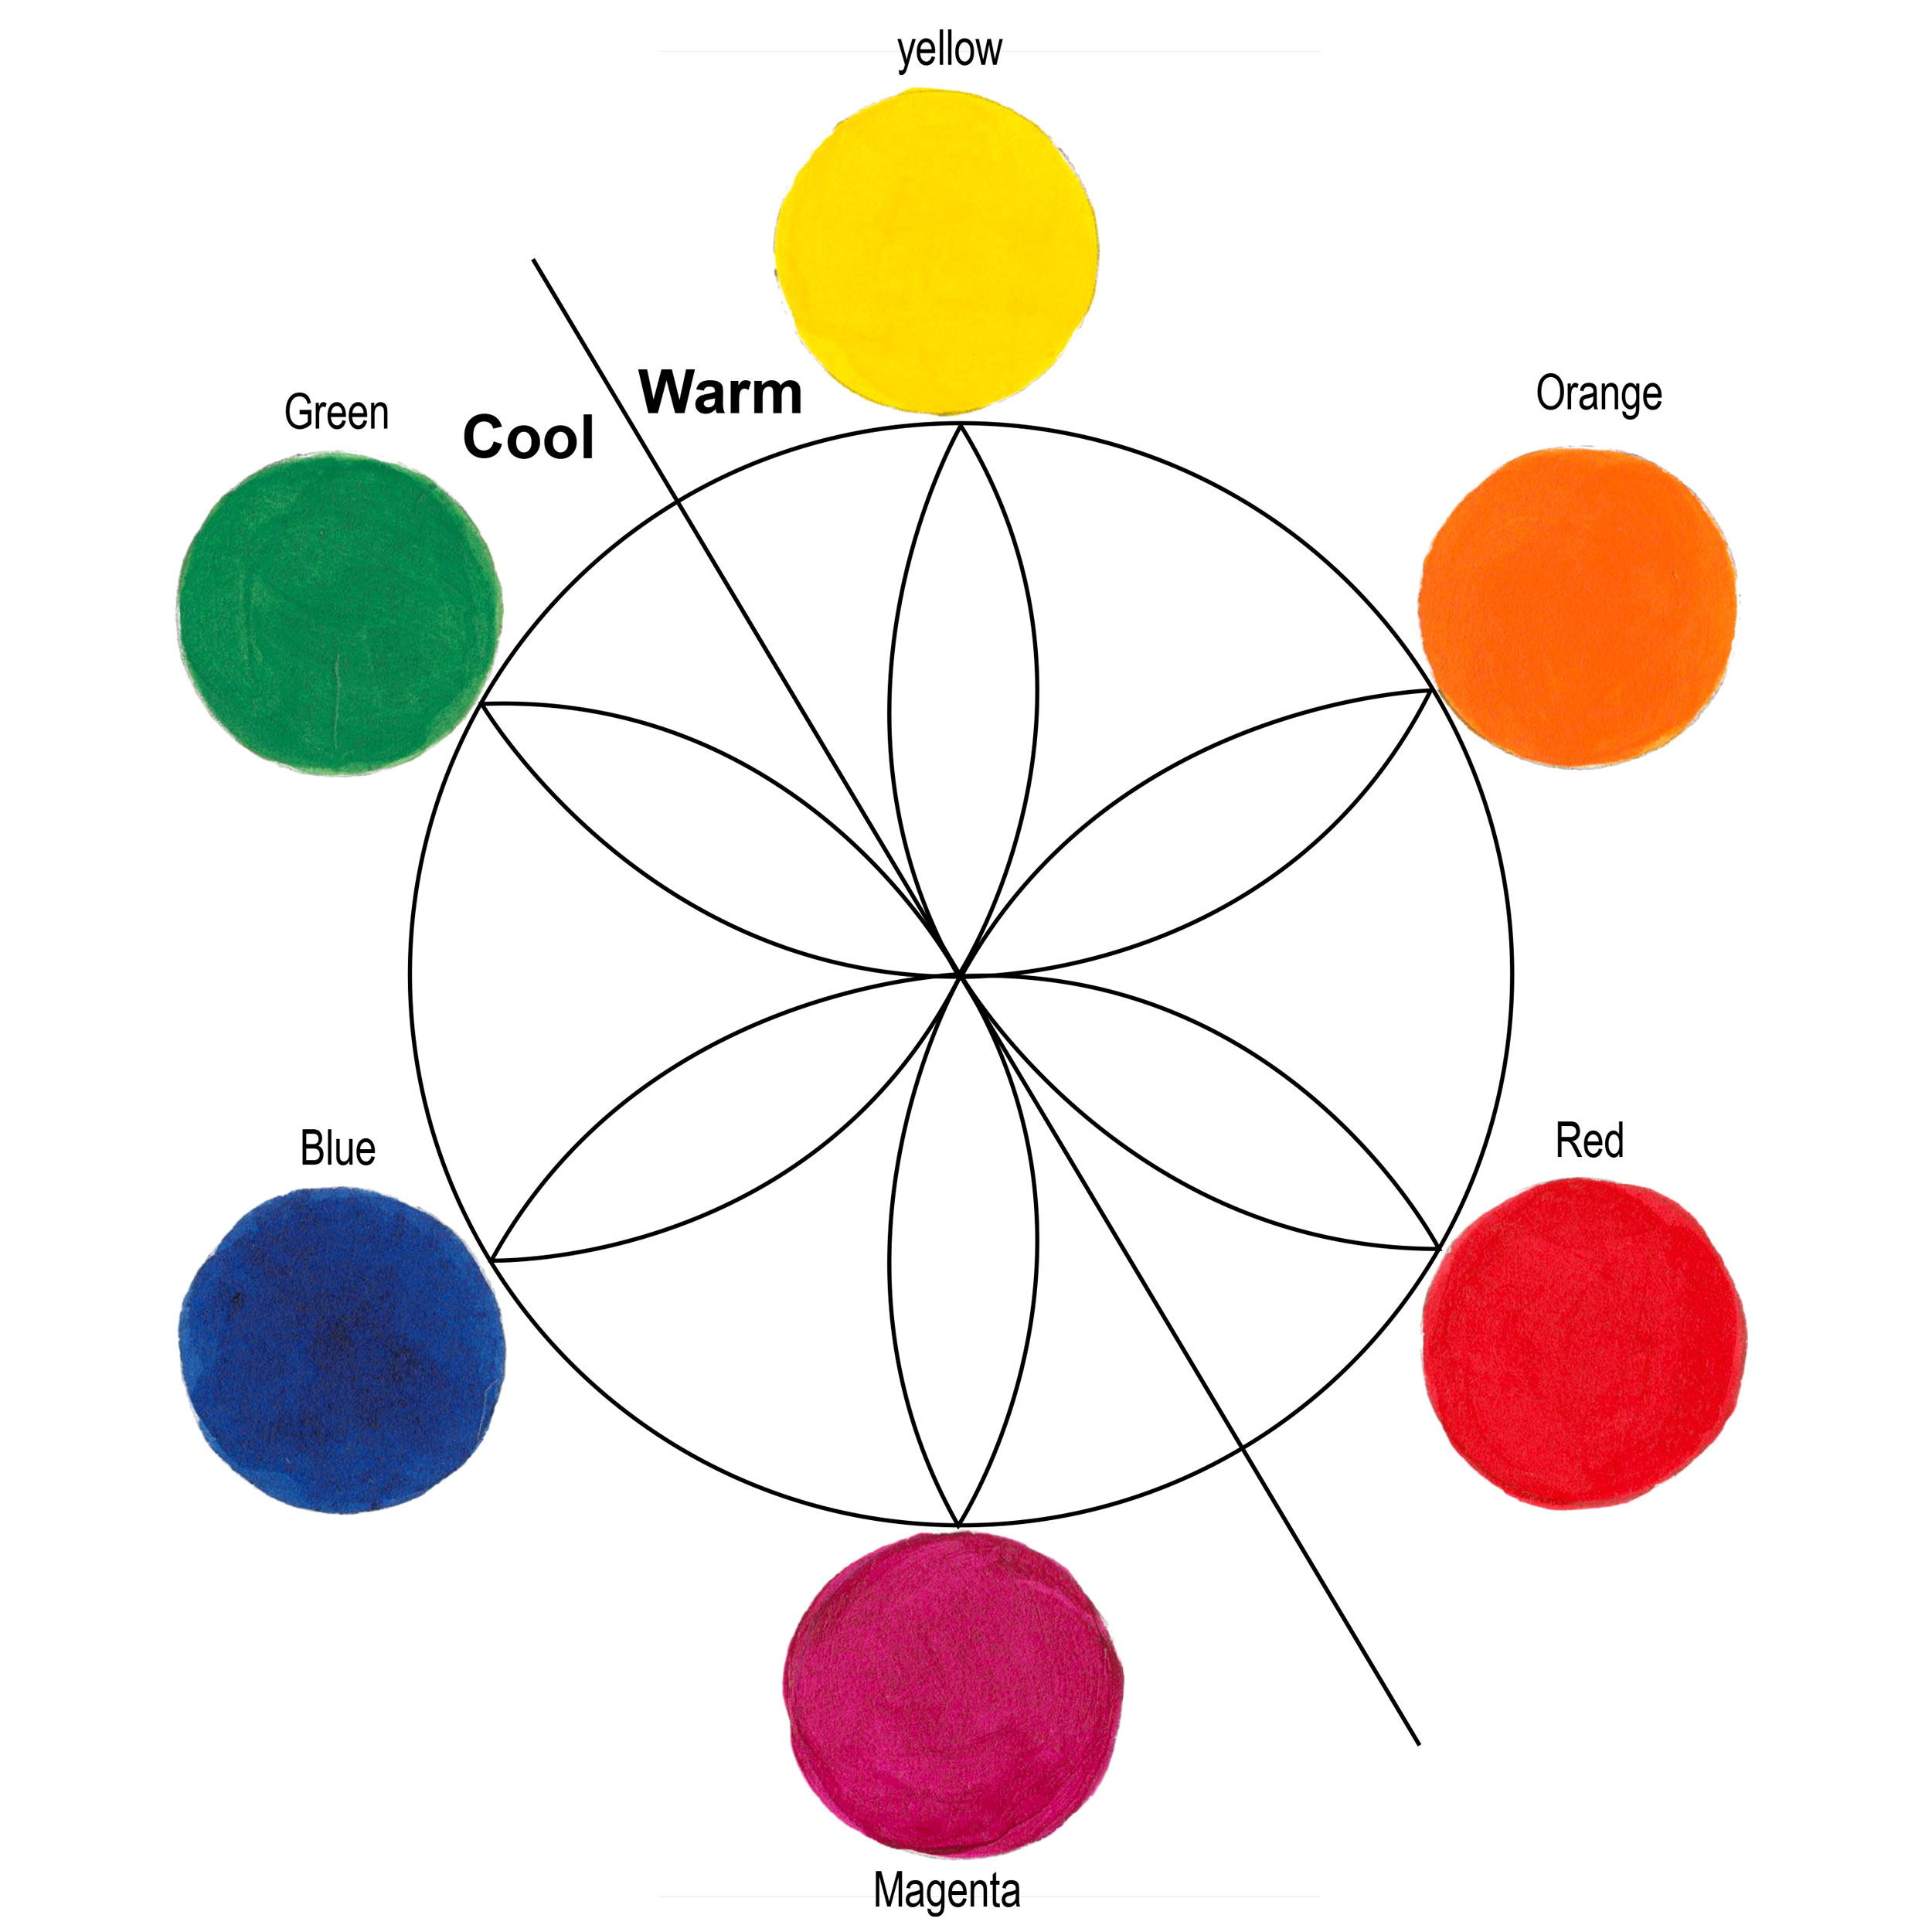 Defining Warm and Cool Colors: It's All Relative